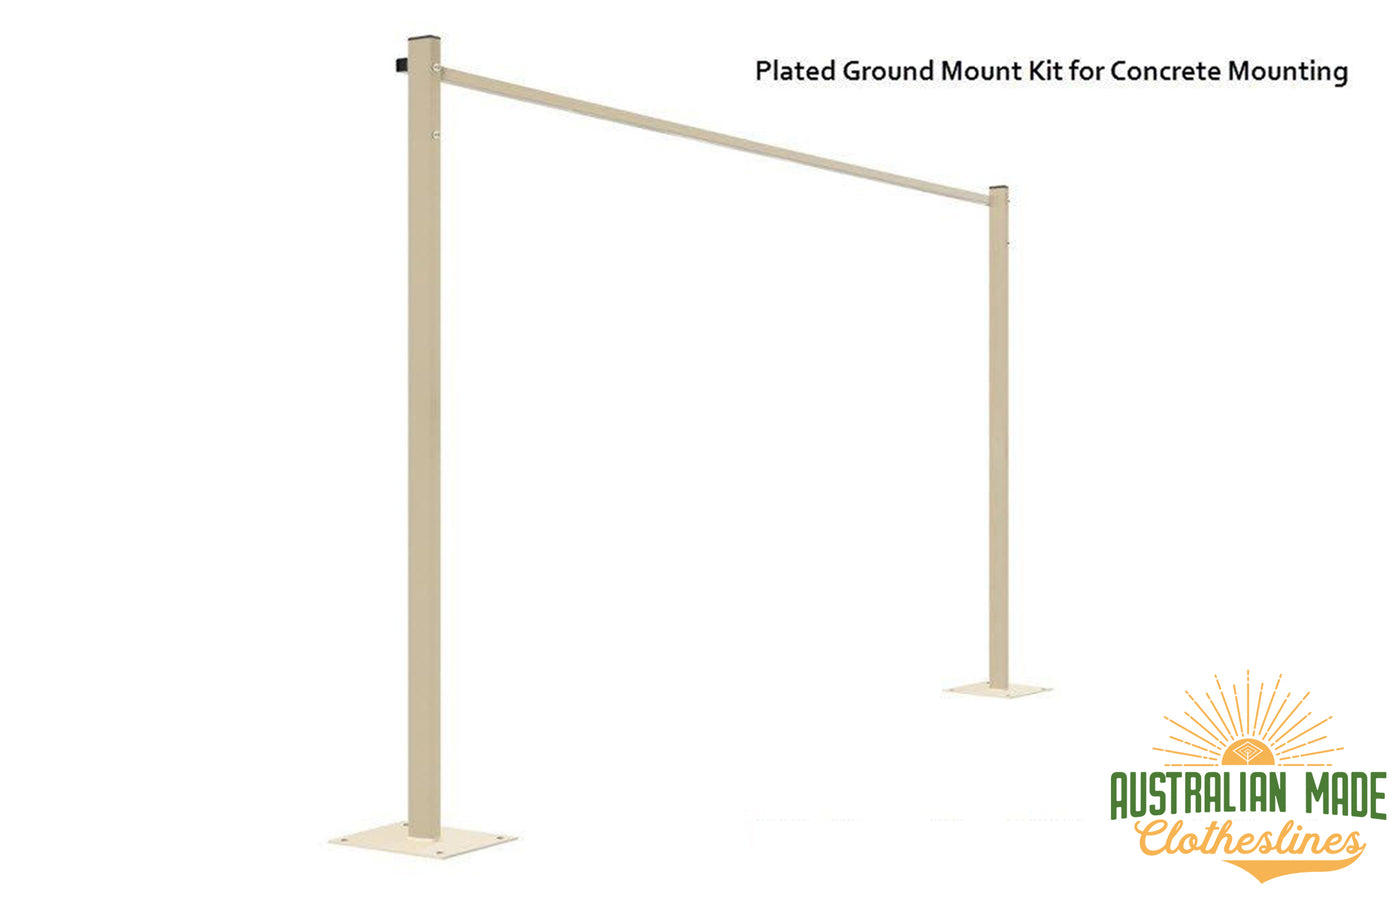 Austral Compact 28 Clothesline - Classic Cream Plated Ground Mount Kit for Concrete Mounting - Australian Made Clotheslines